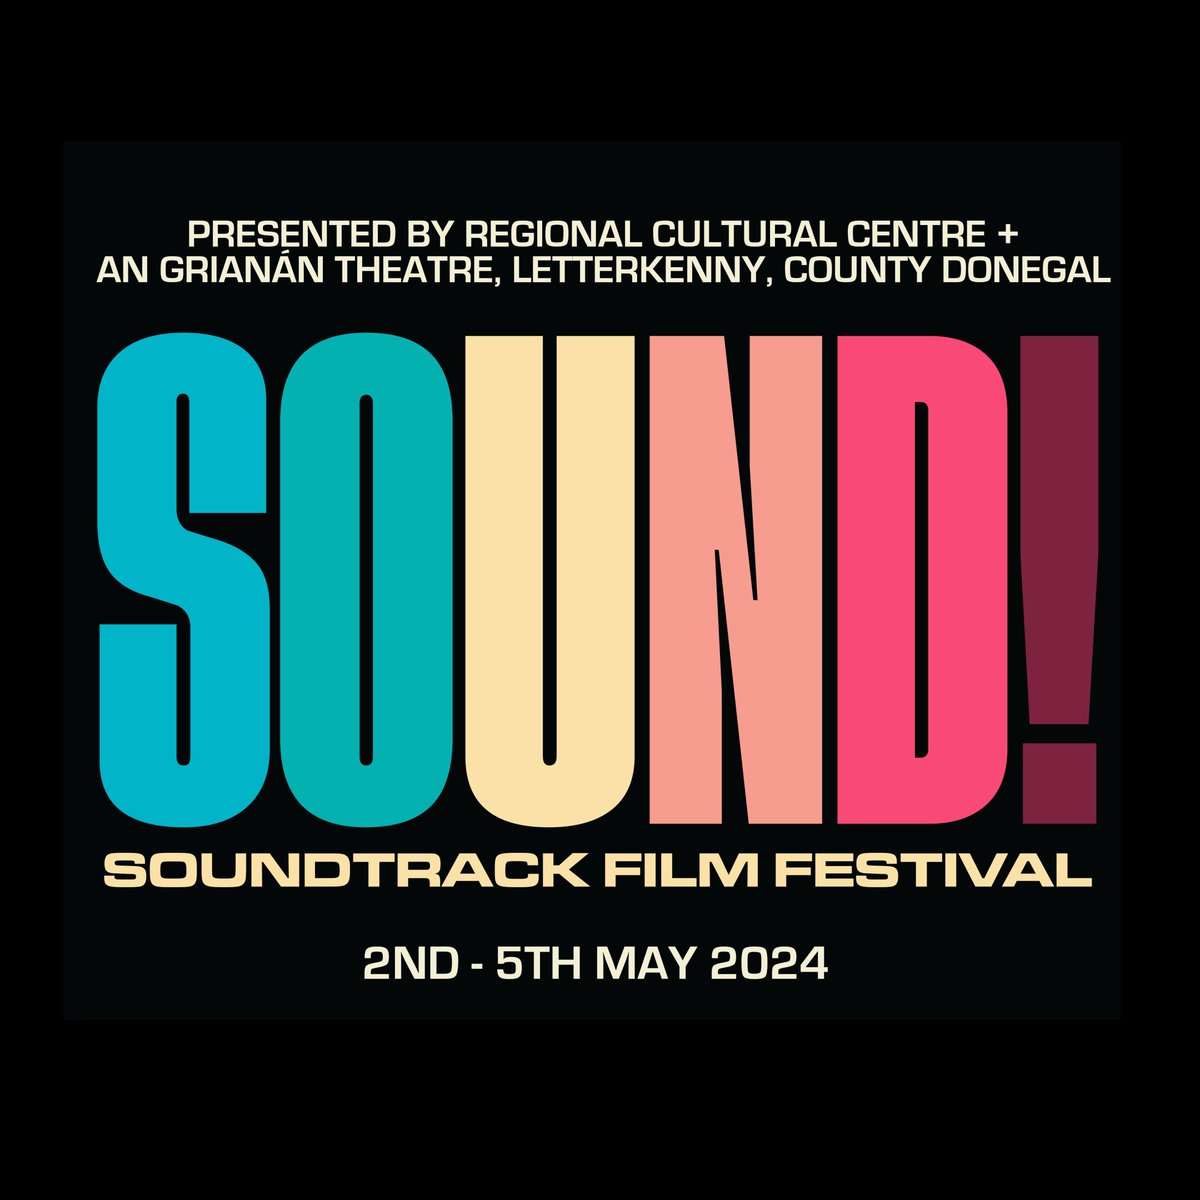 Celebrating the art of music and sound in film, Sound! is presented by Regional Cultural Centre Letterkenny in partnership with An Grianán Theatre. Full details ➡️ regionalculturalcentre.com/sound2024/ #Donegal #YourCouncil